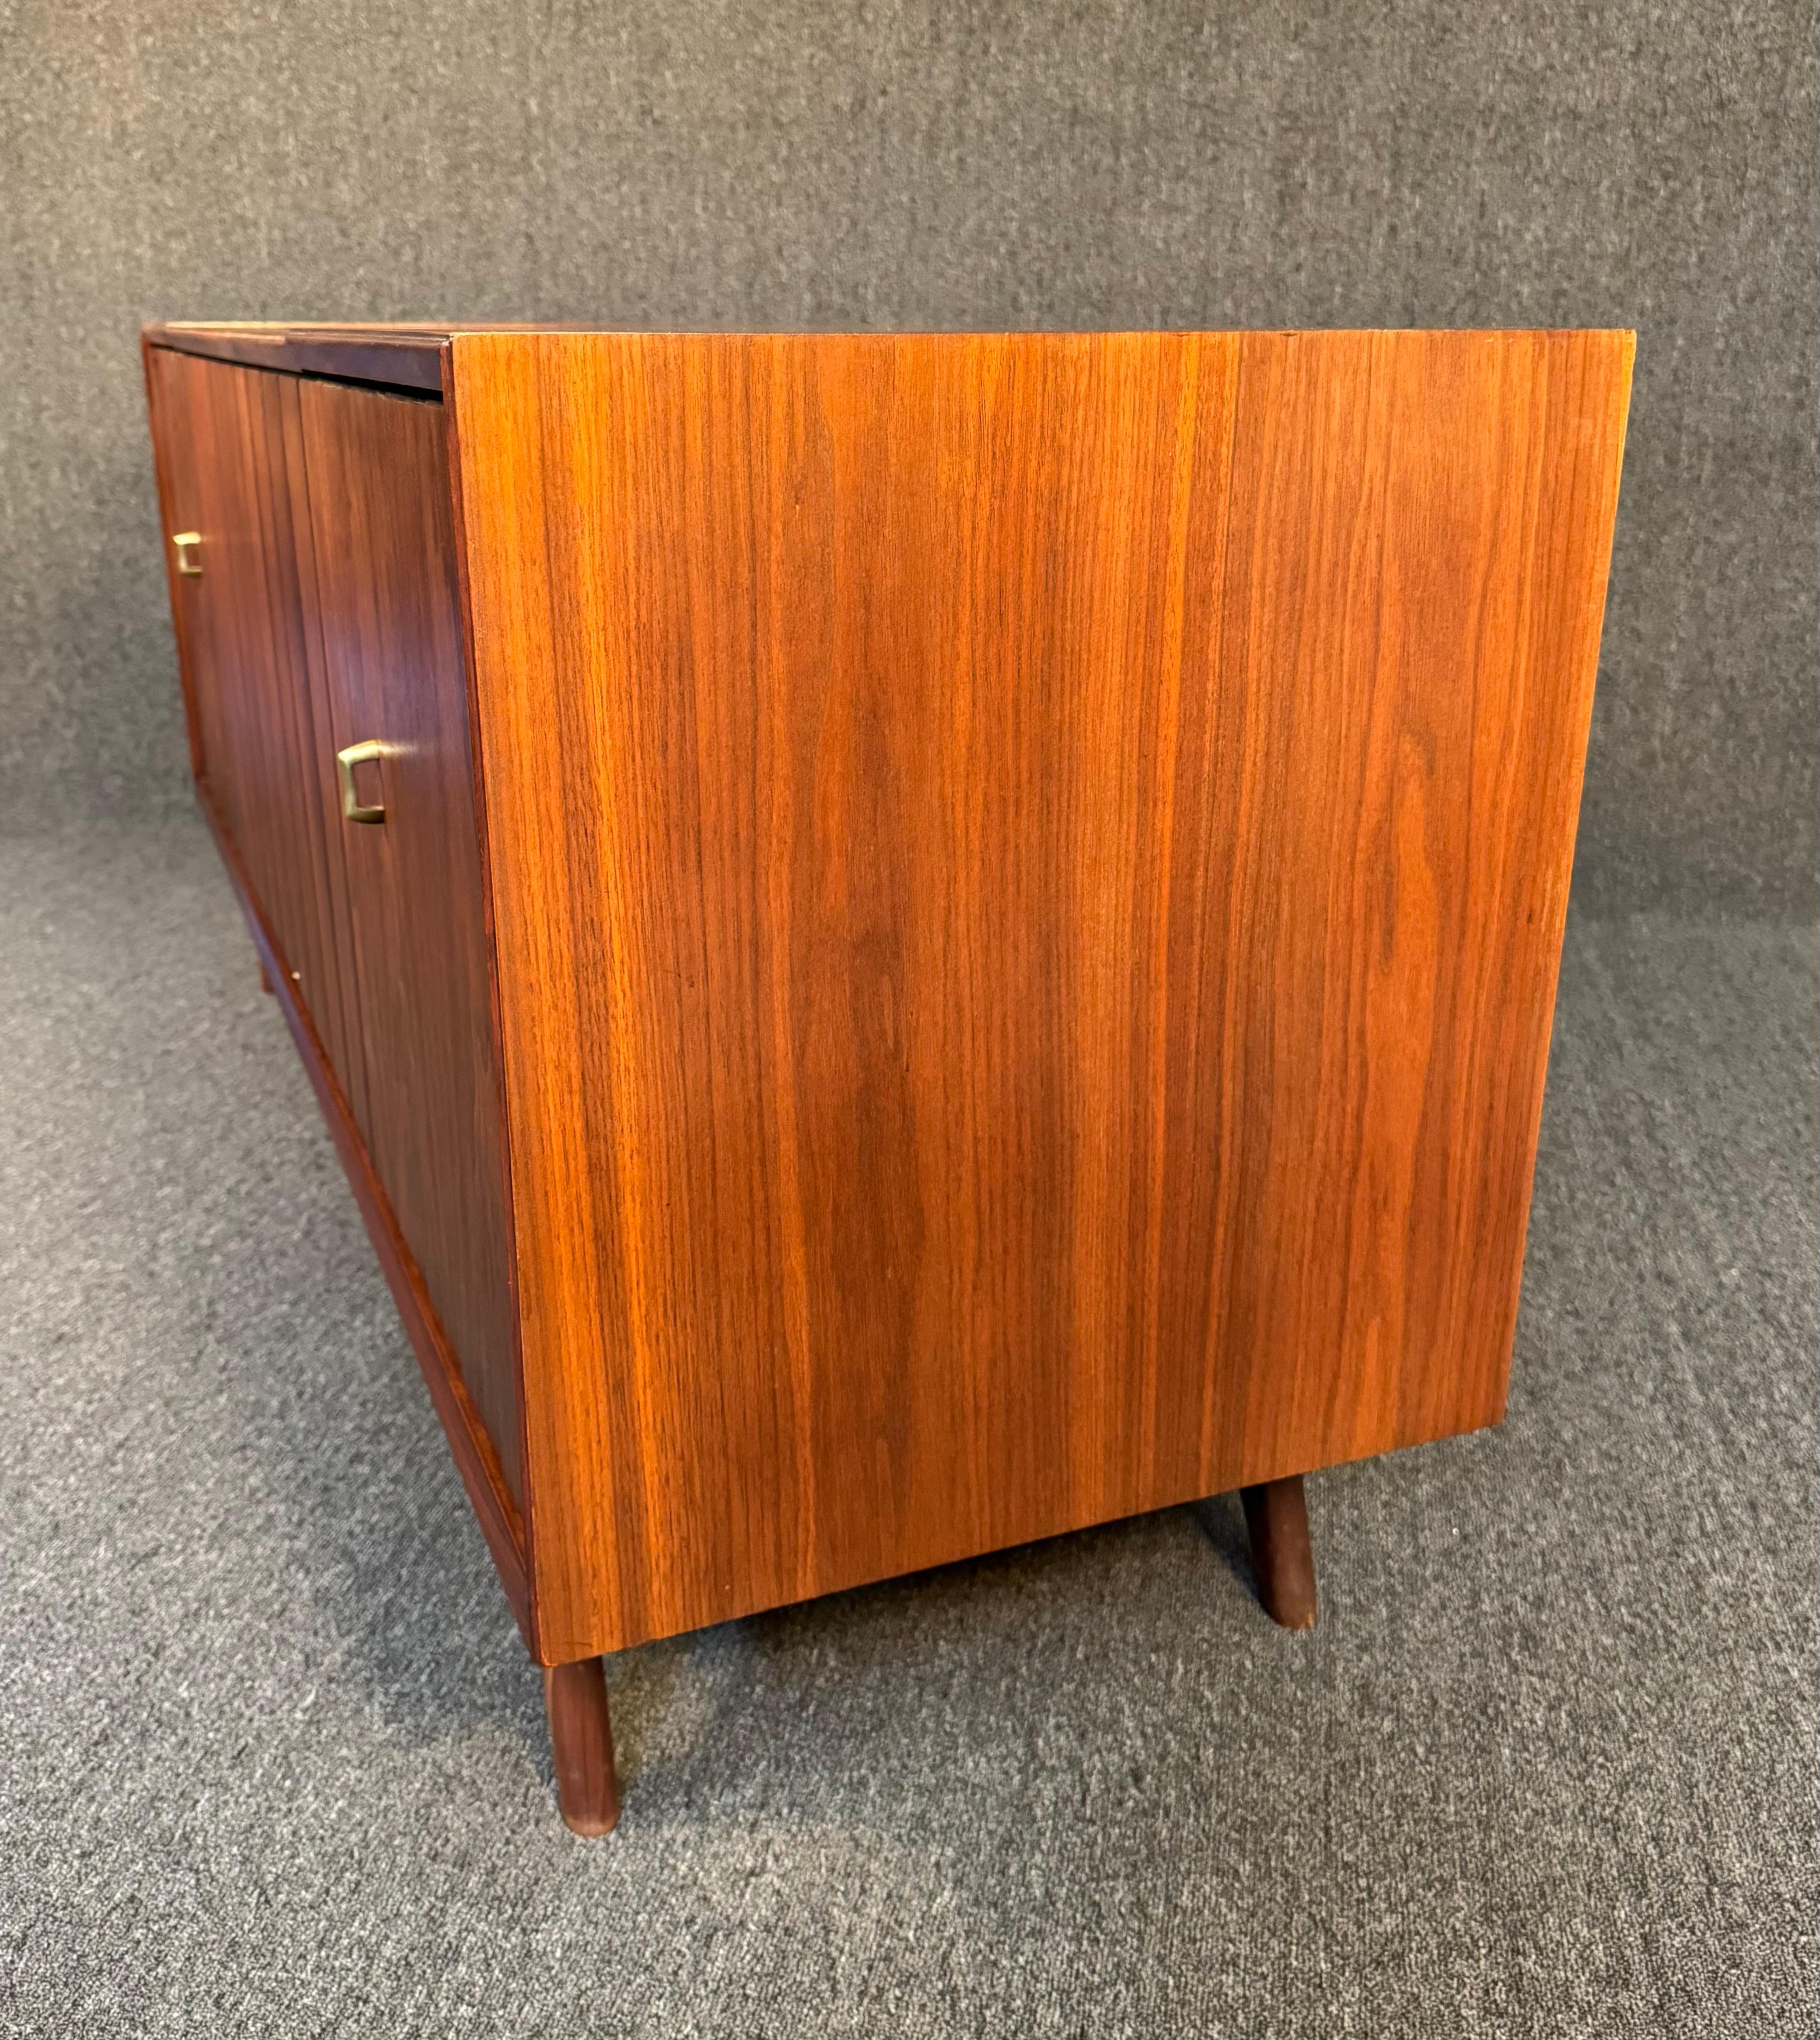 Vintage Mid Century Modern Walnut Zenith Stereo Console For Sale 2